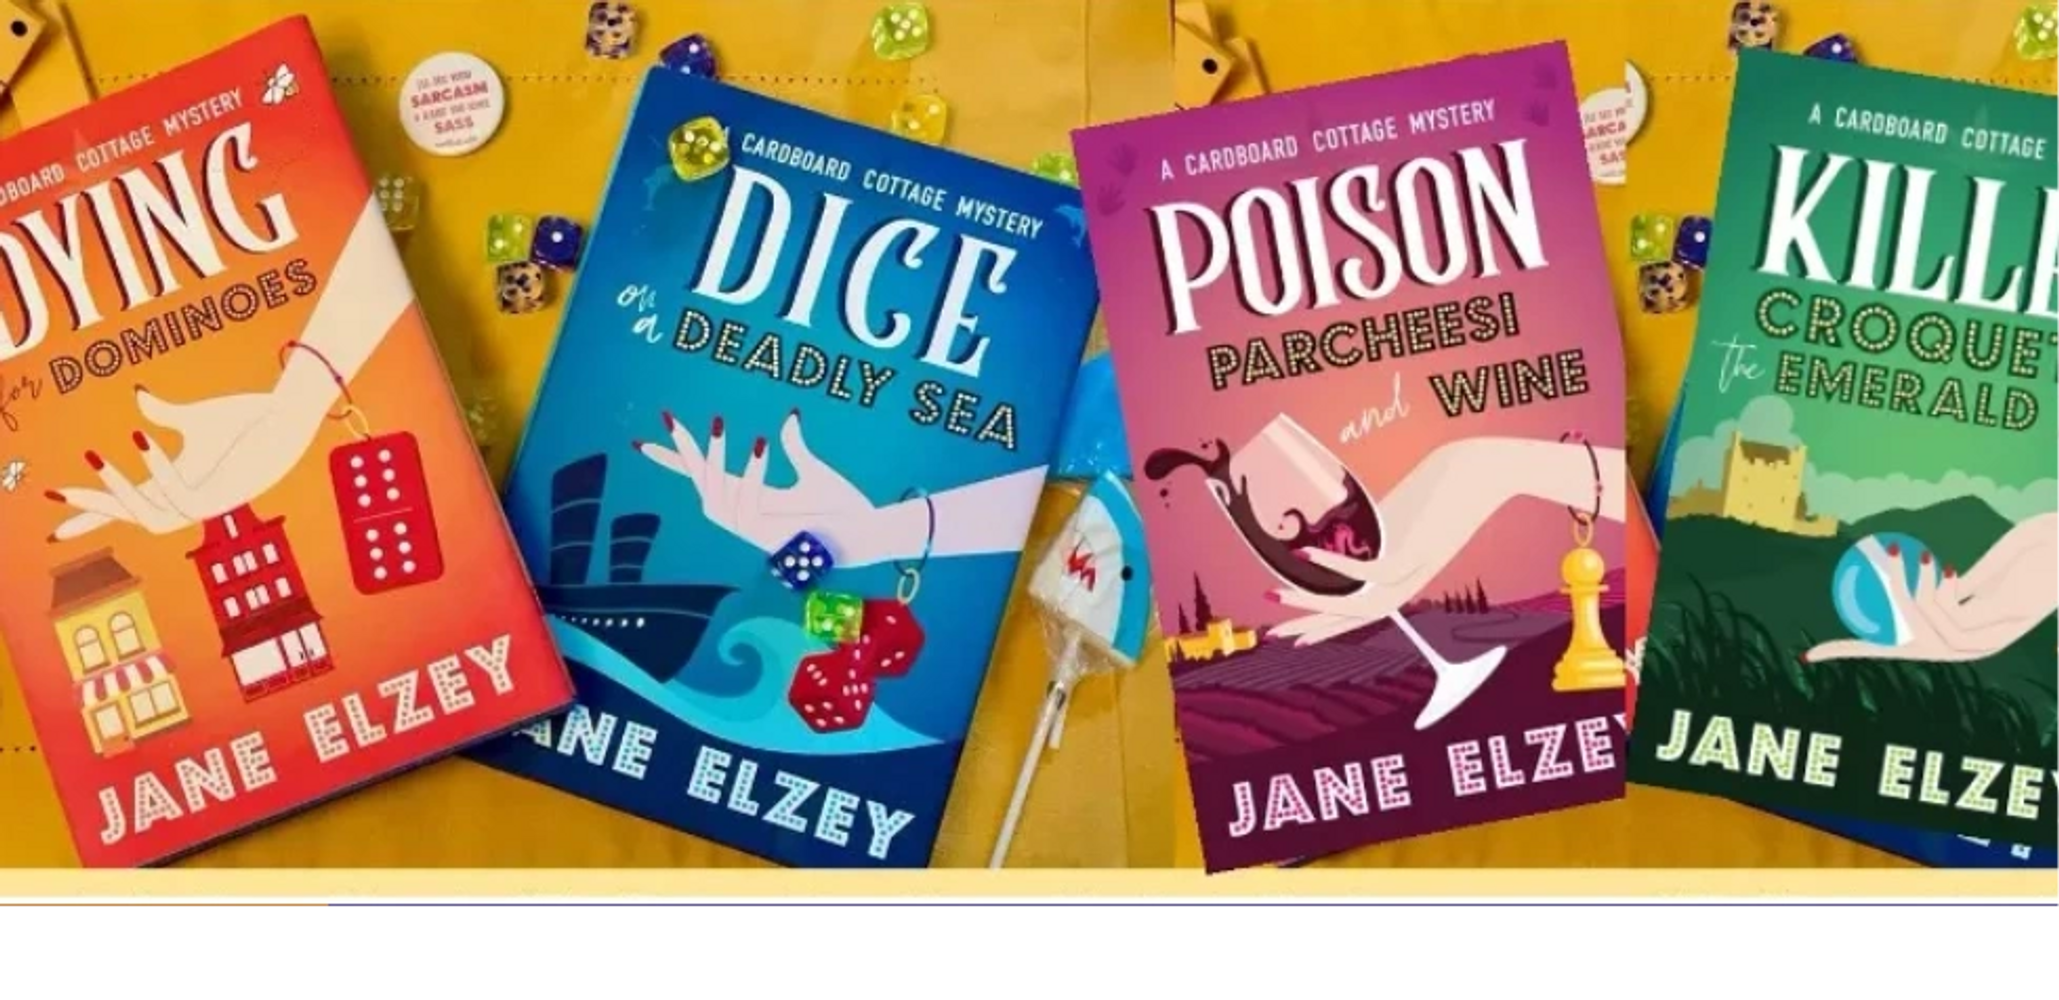 cover over four books in cardboard cottage mystery series by jane elzey 